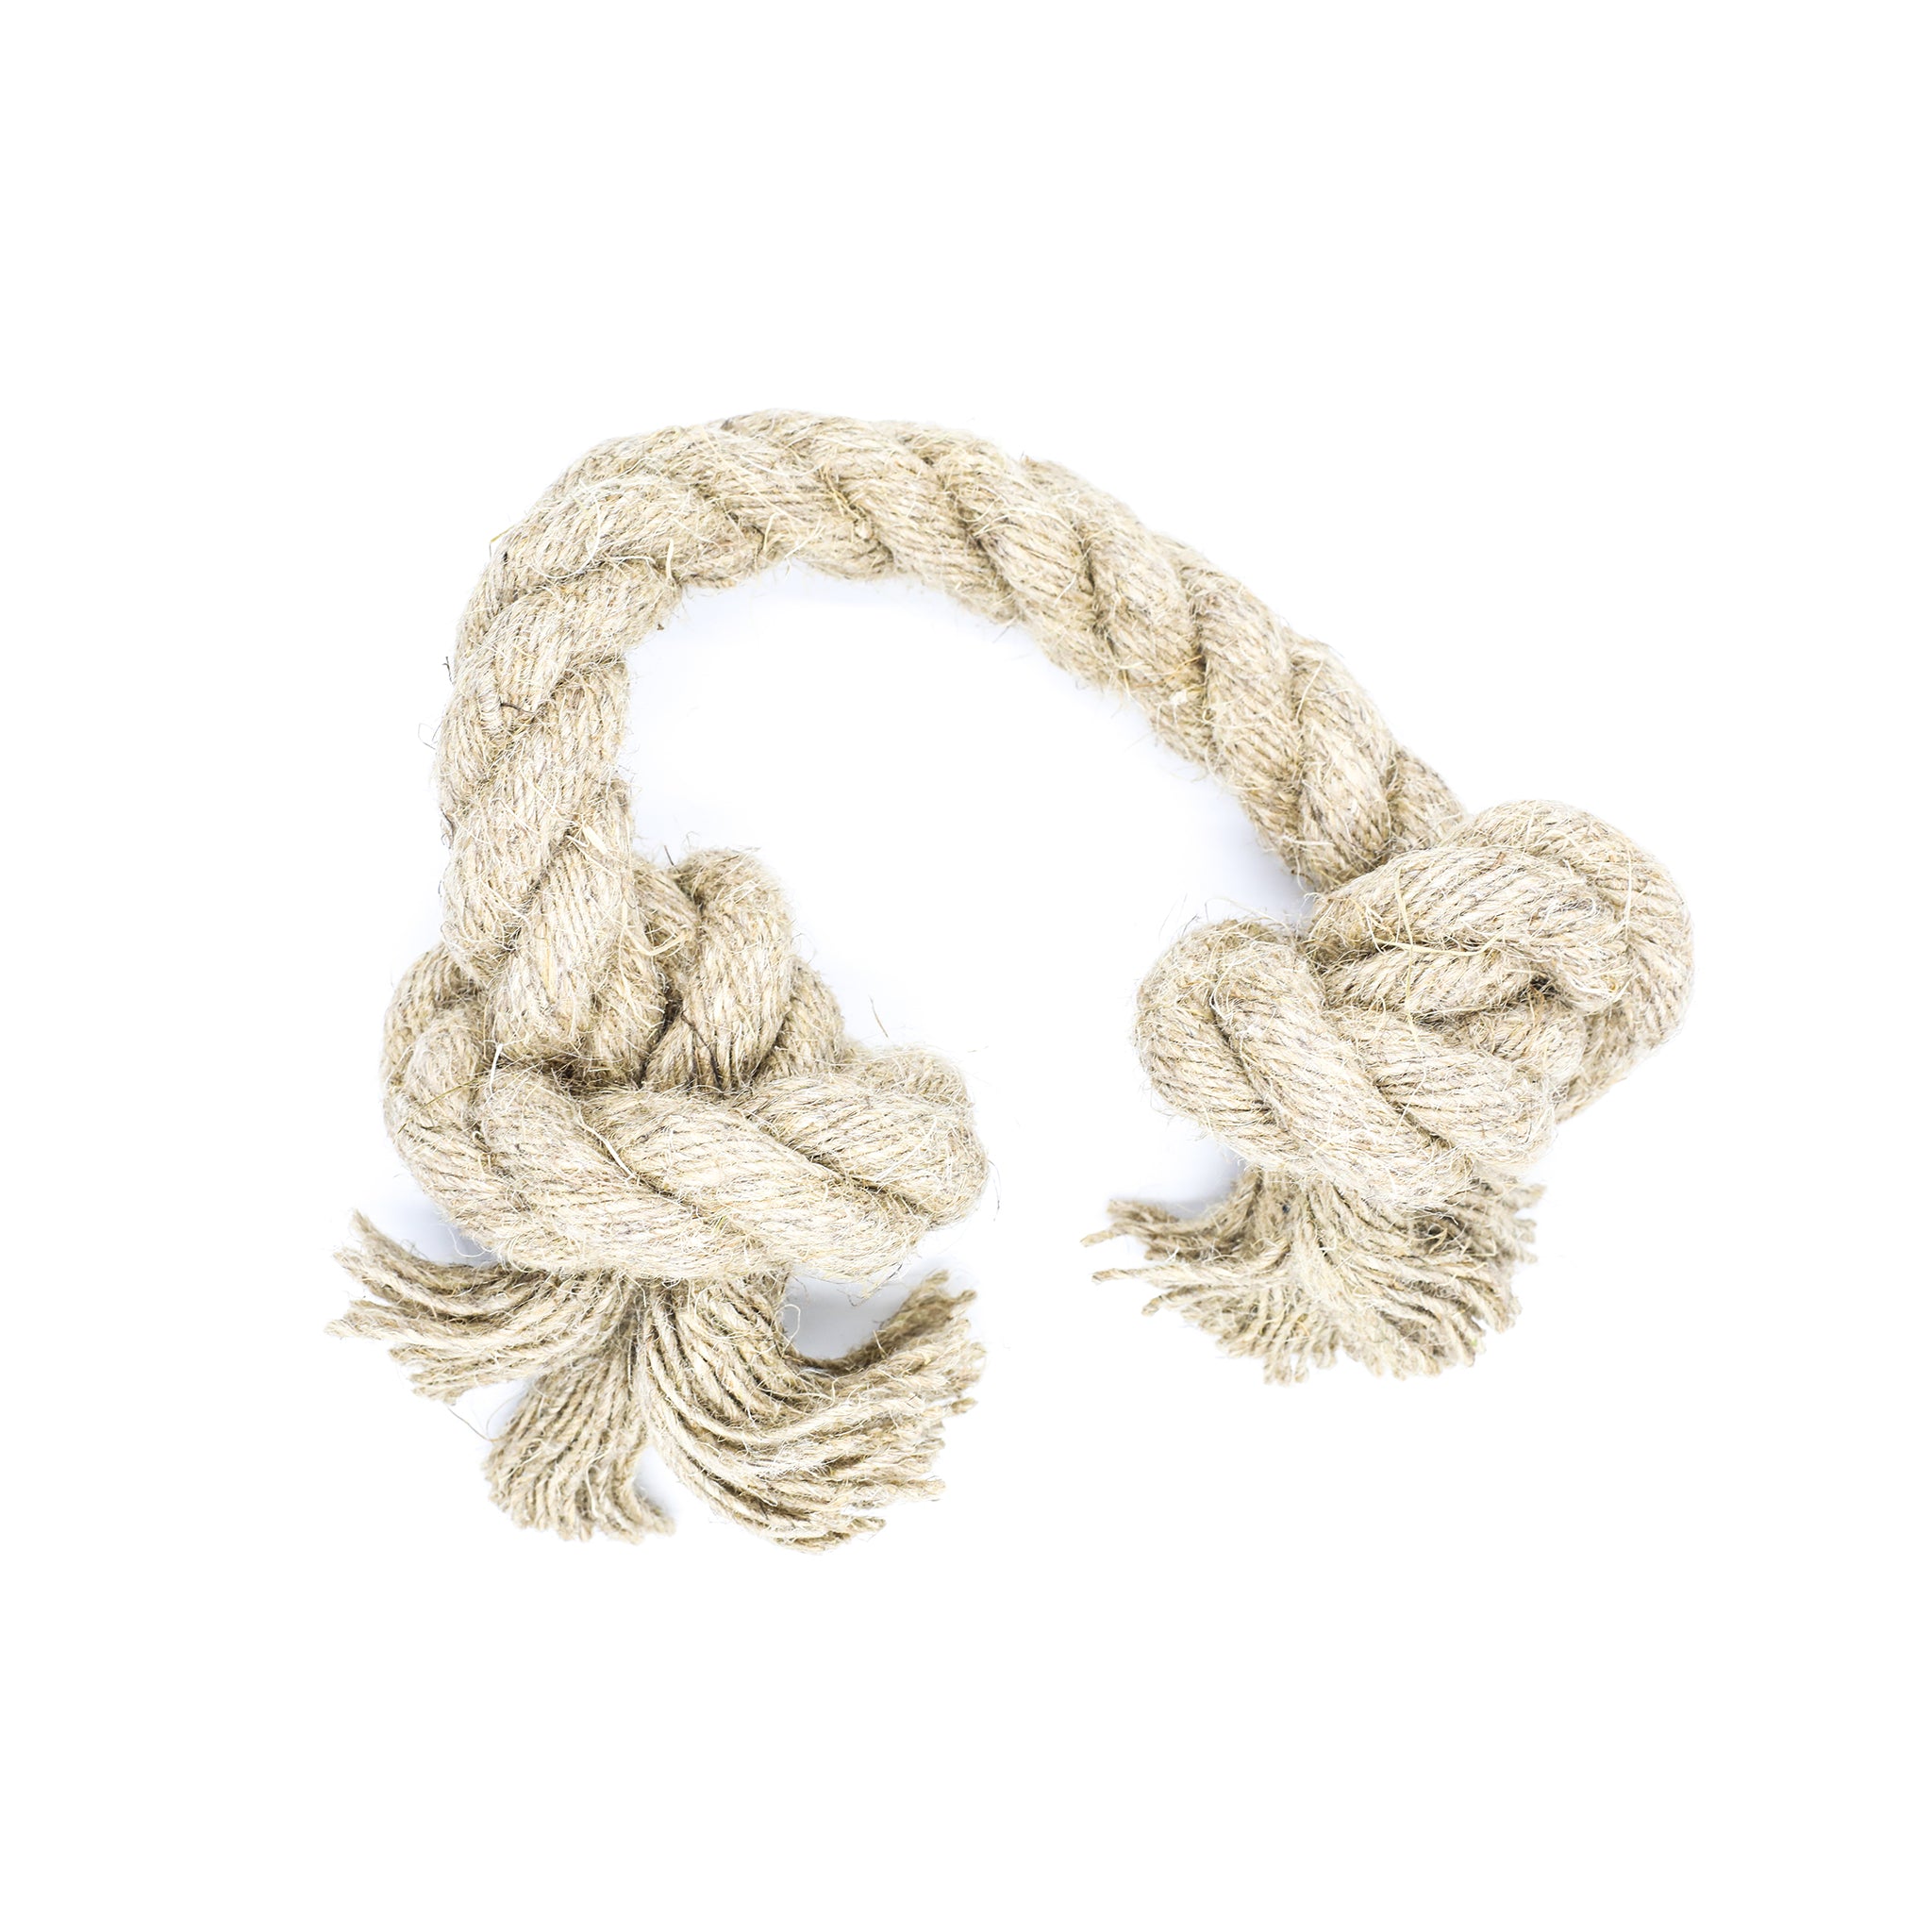 Rope dog toy, with two knots either end, curved upright on a white back ground. Natural jute dog toy